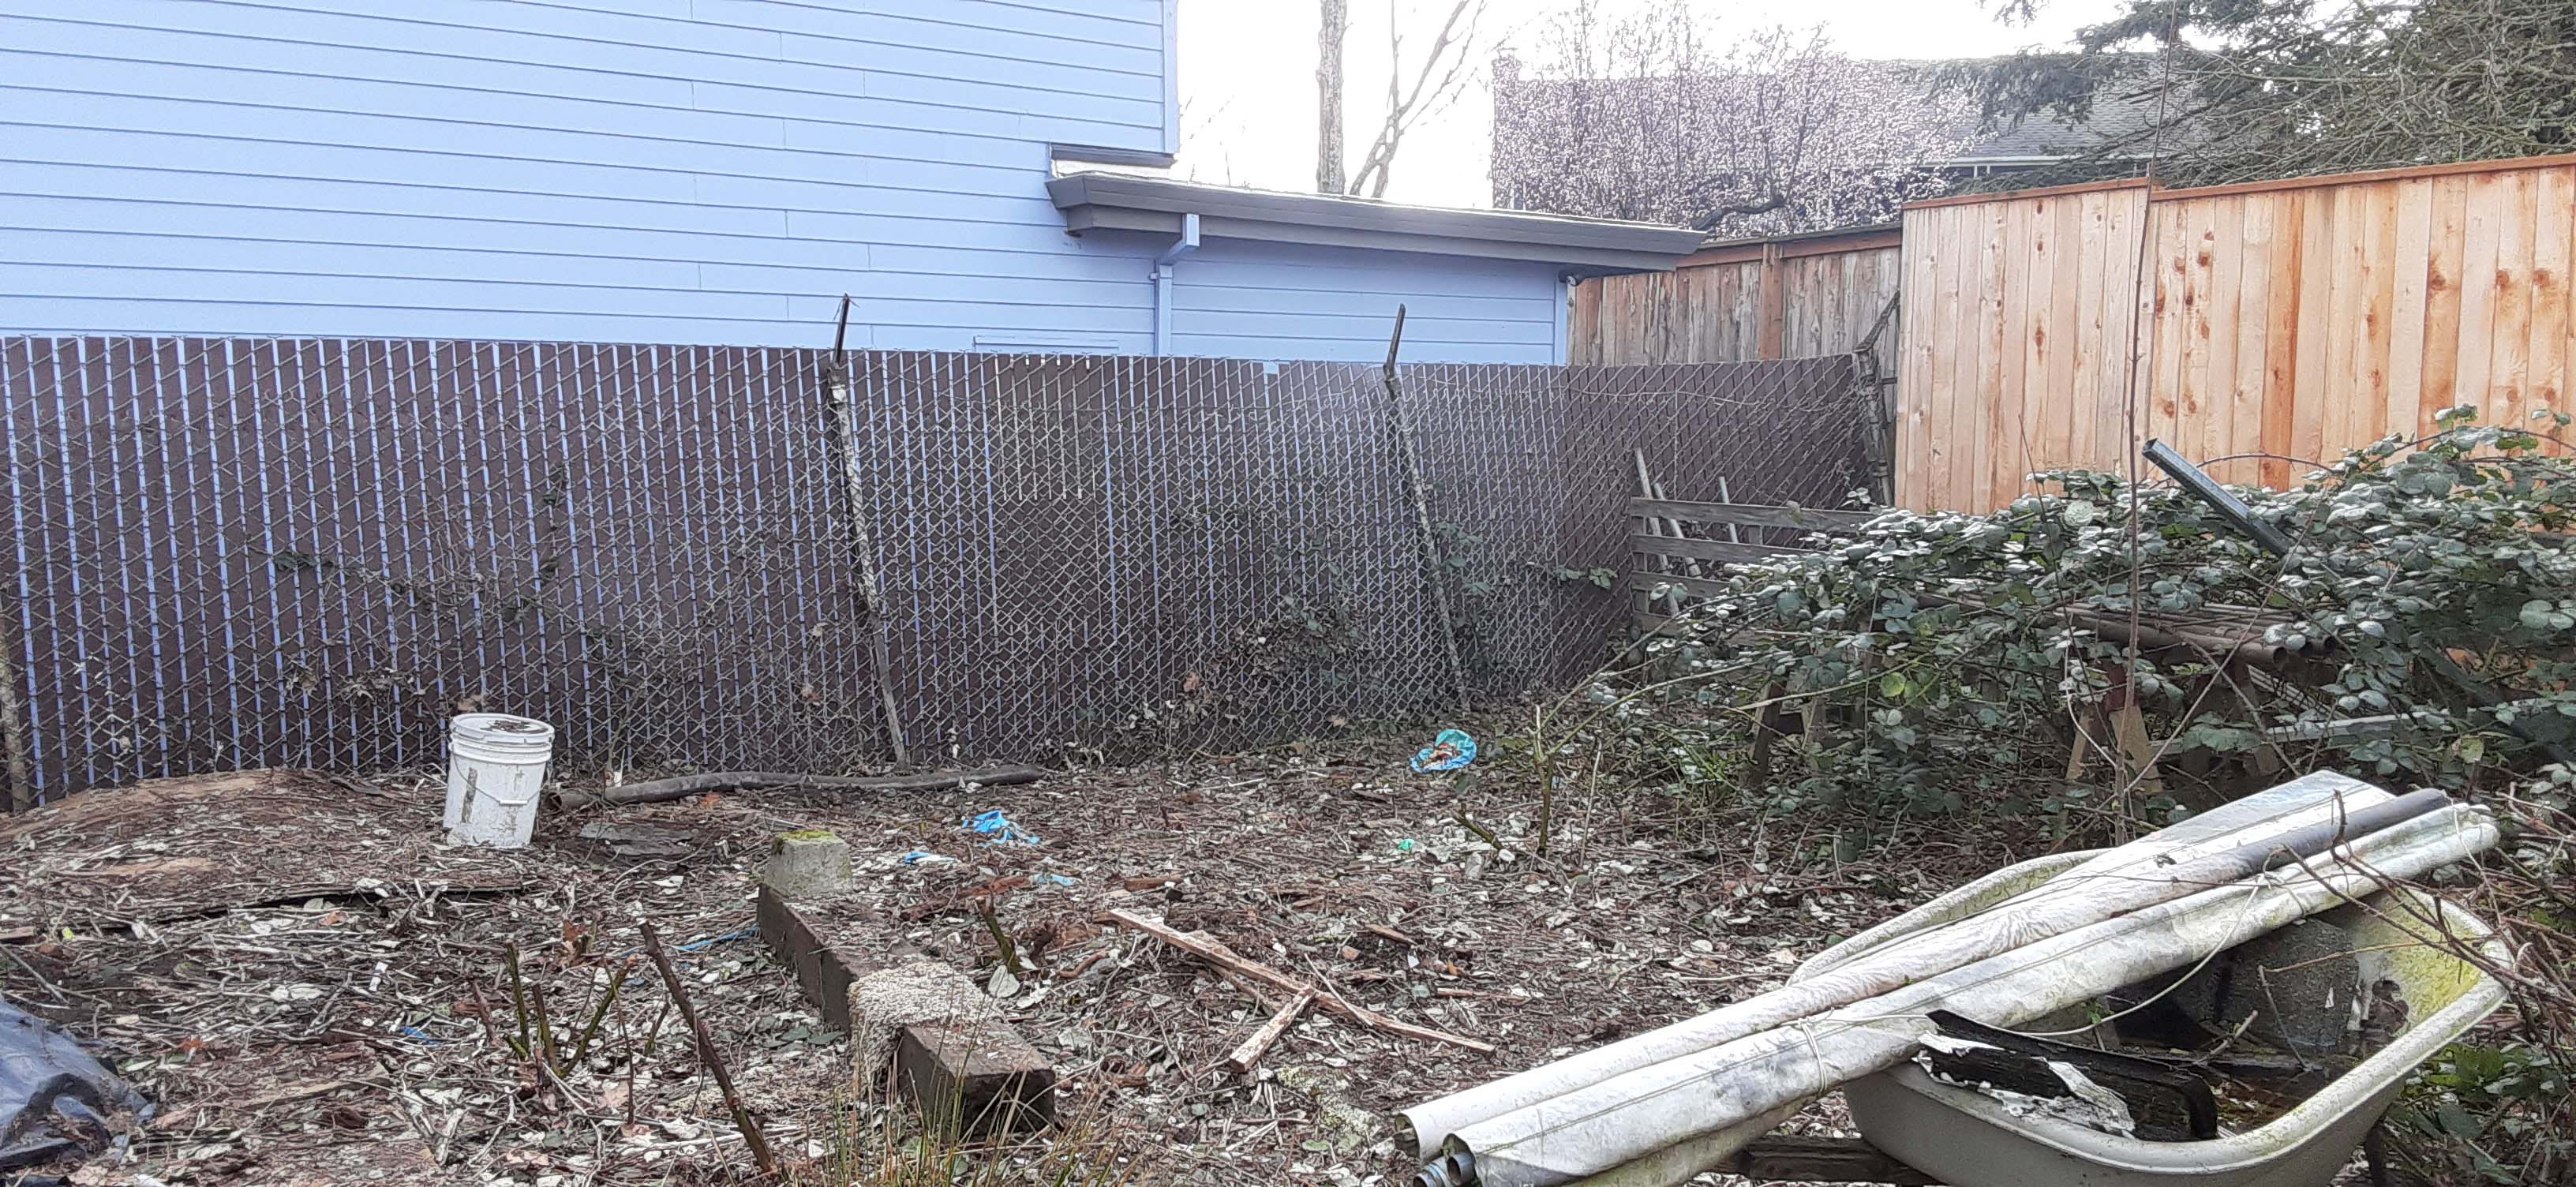 Backyard with a lot of debris, trash and overgrown plants